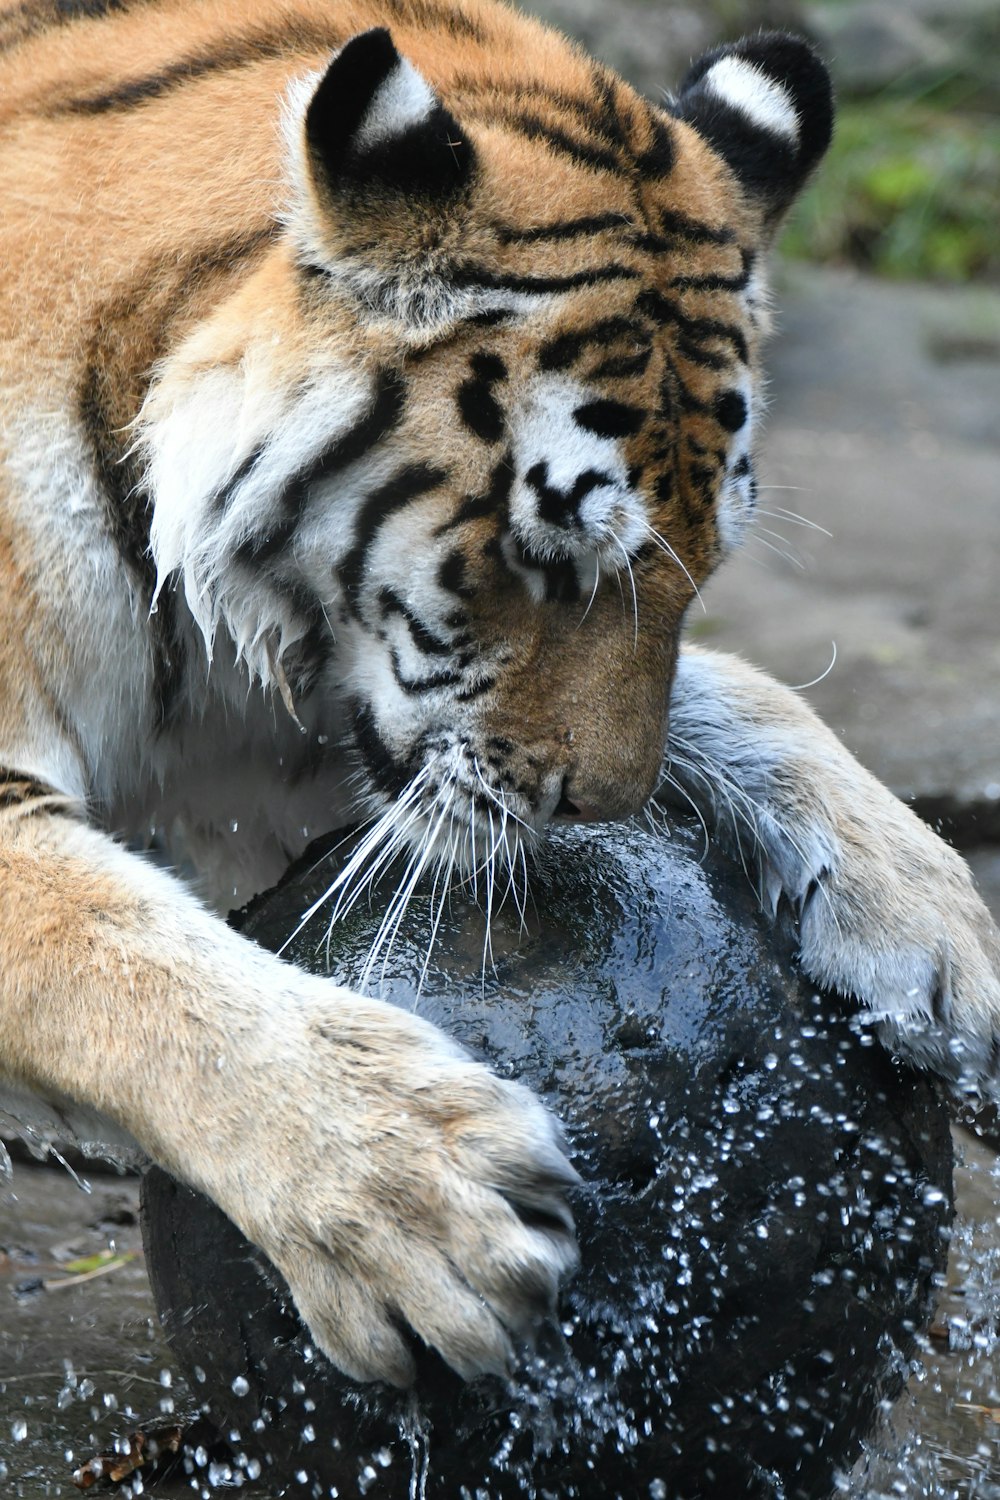 a tiger drinking water